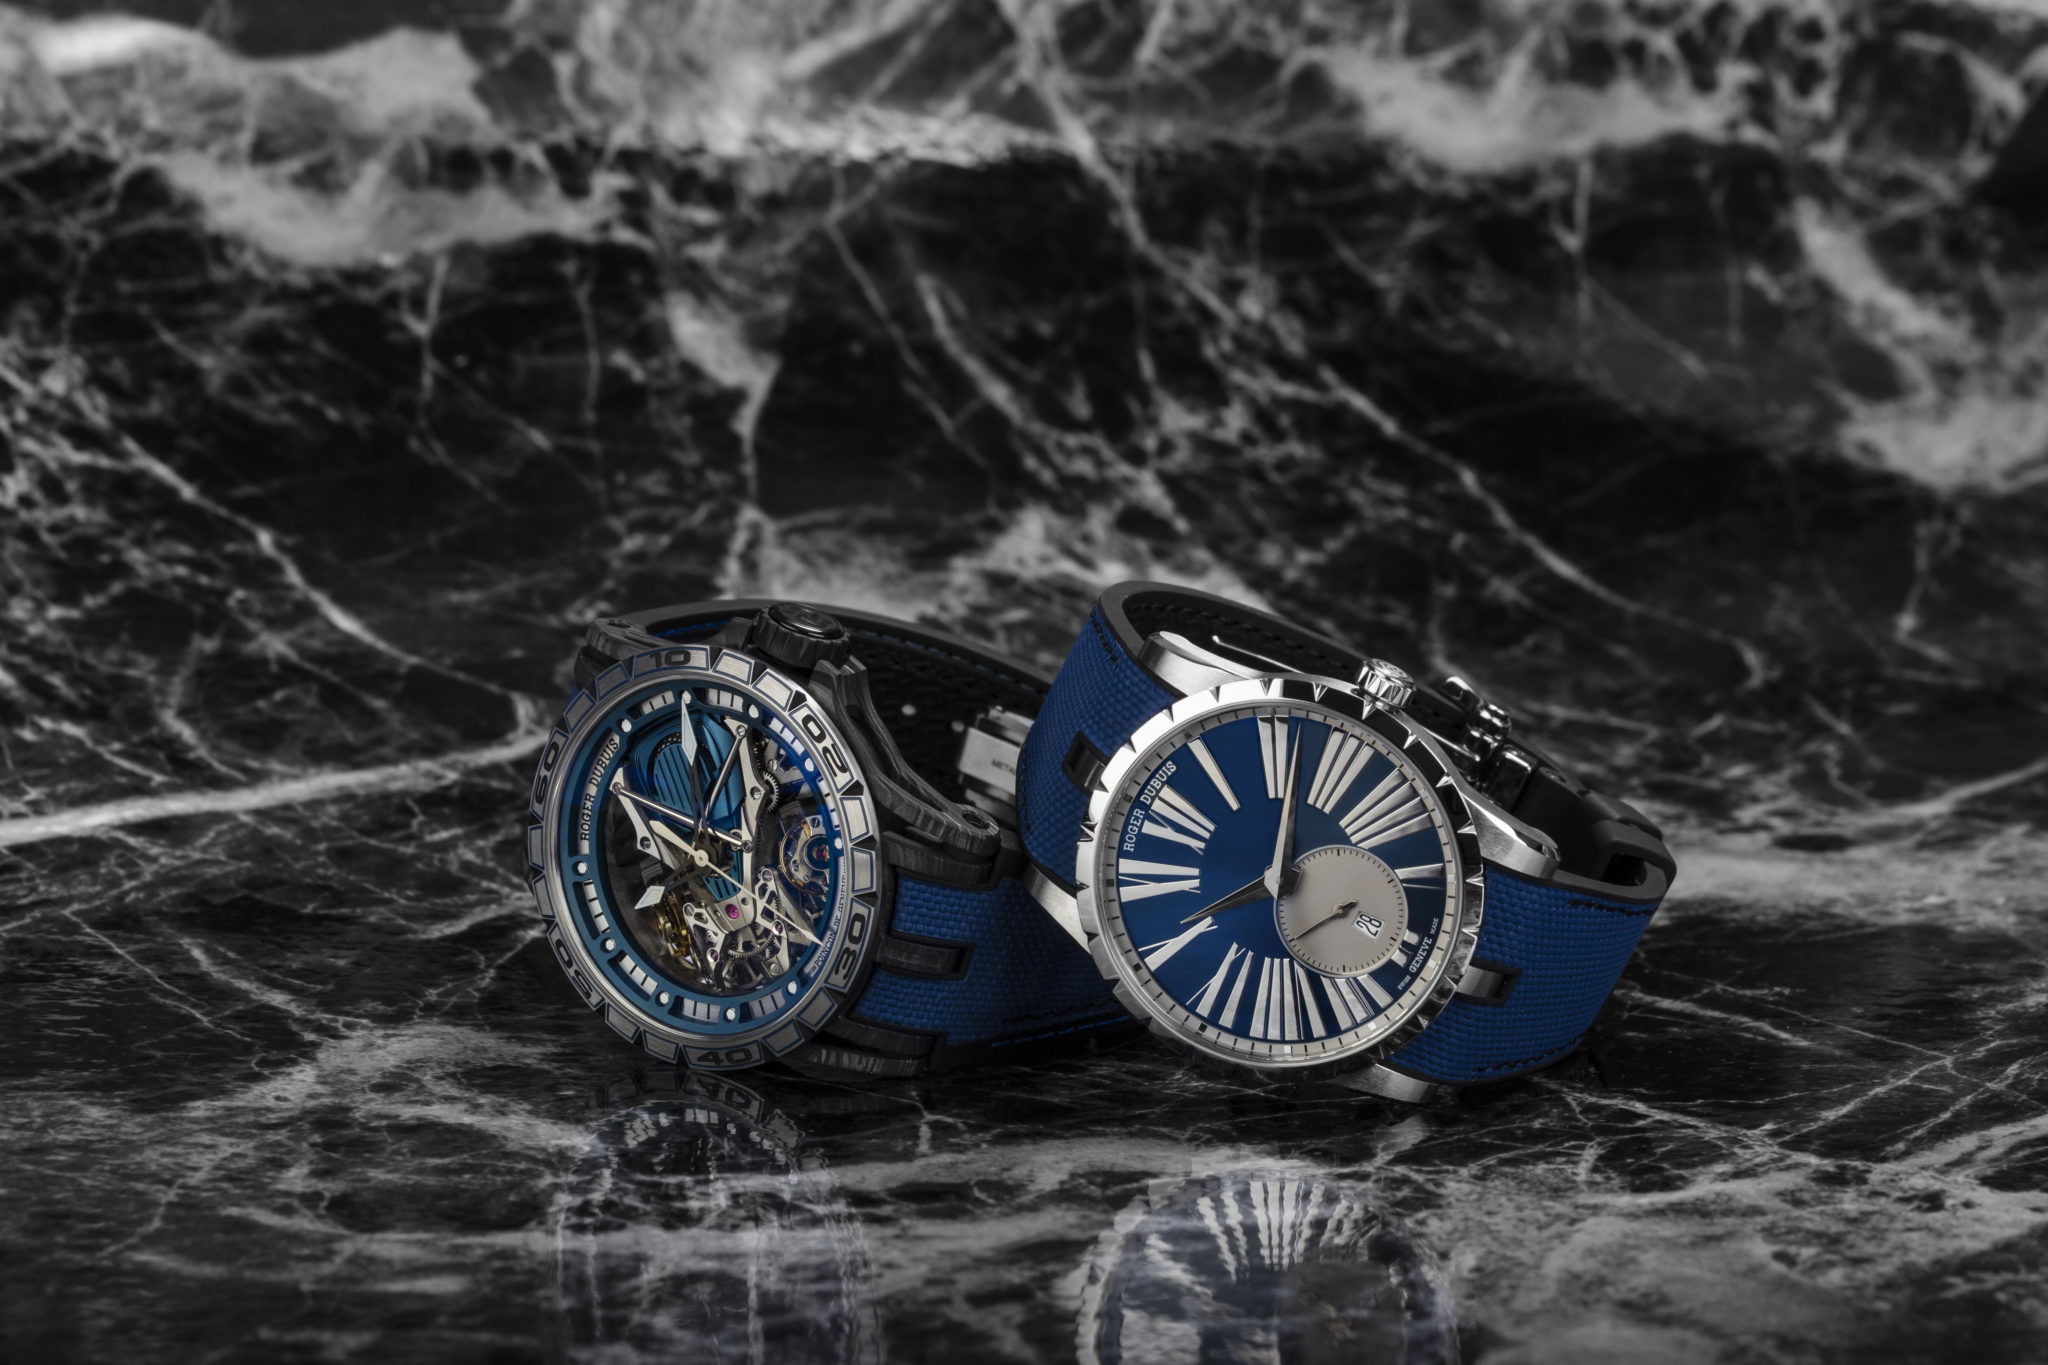 Roger dubuis rddbex0740 723589 blue social 45mm and roger dubuis rddbex0730 723299 skeleton social 45mm 00966